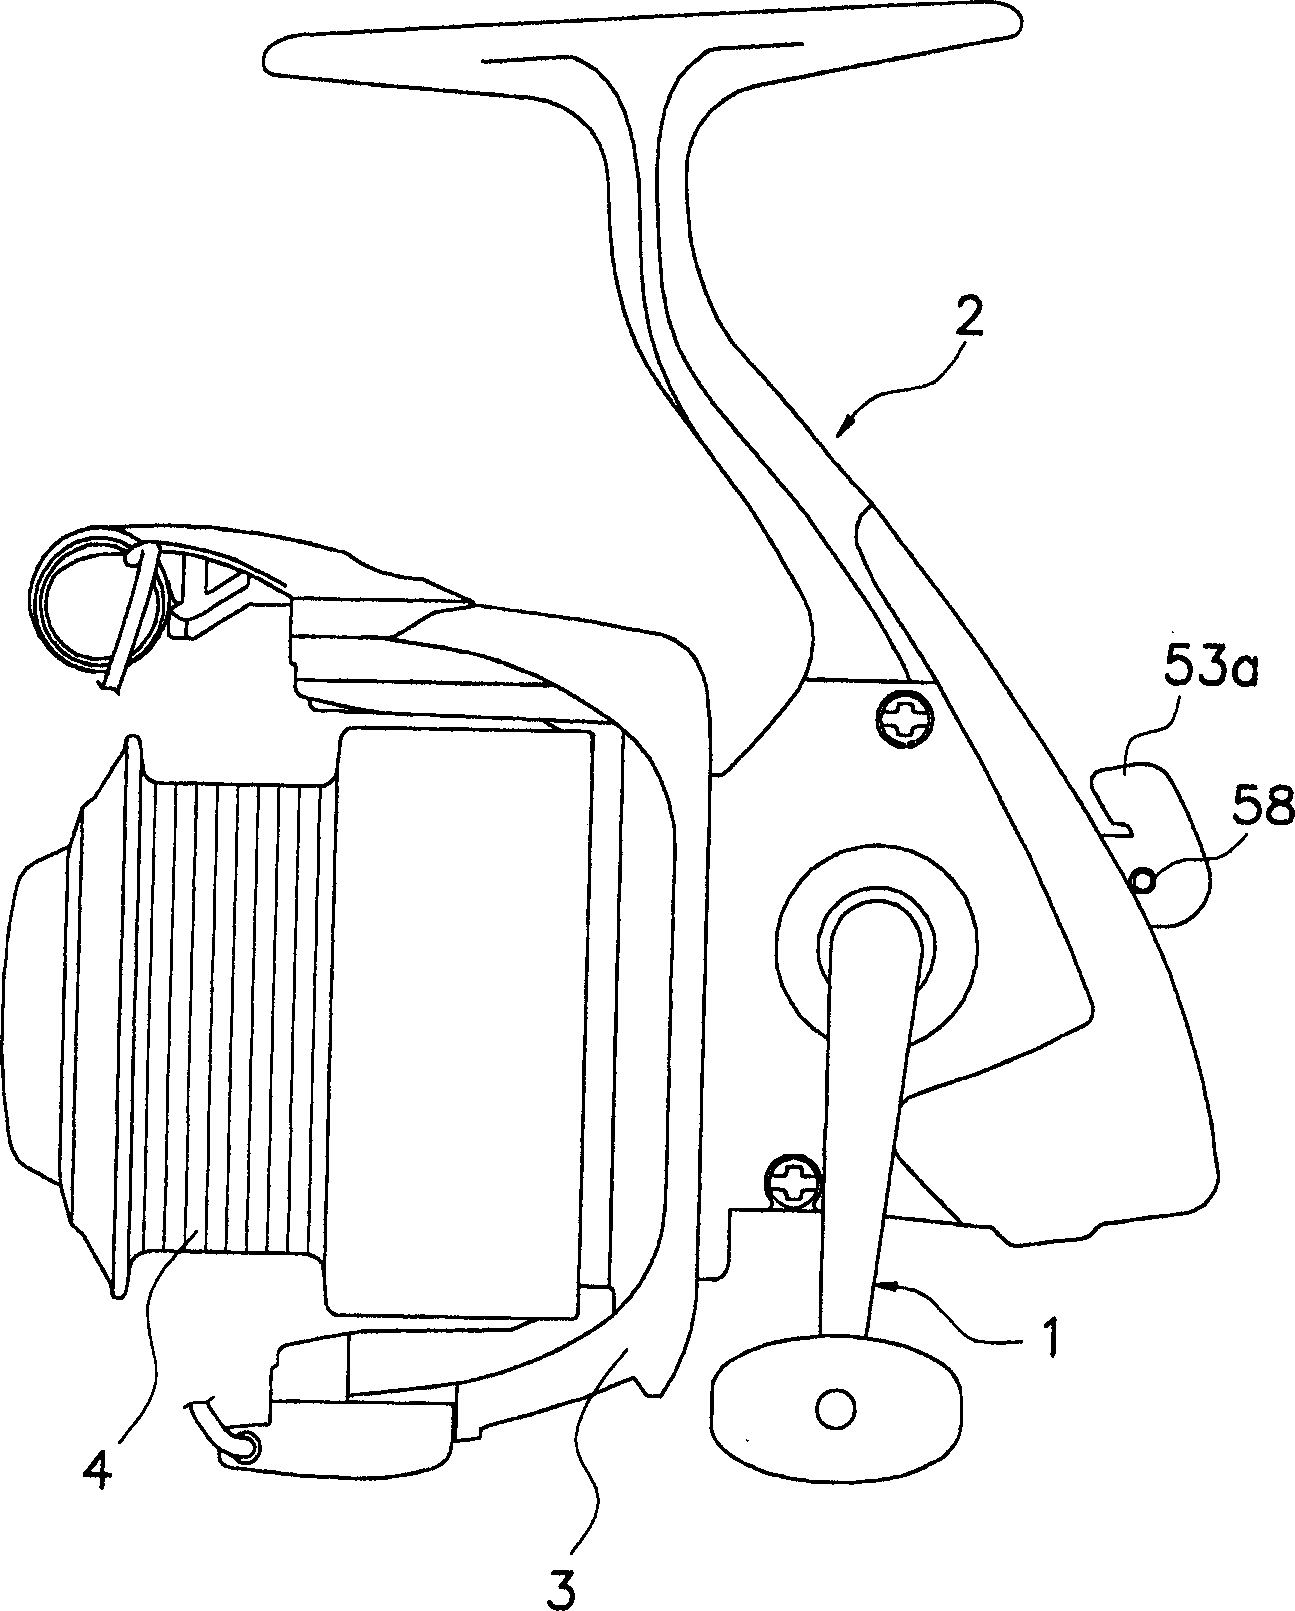 Rotor of rotating wire winder